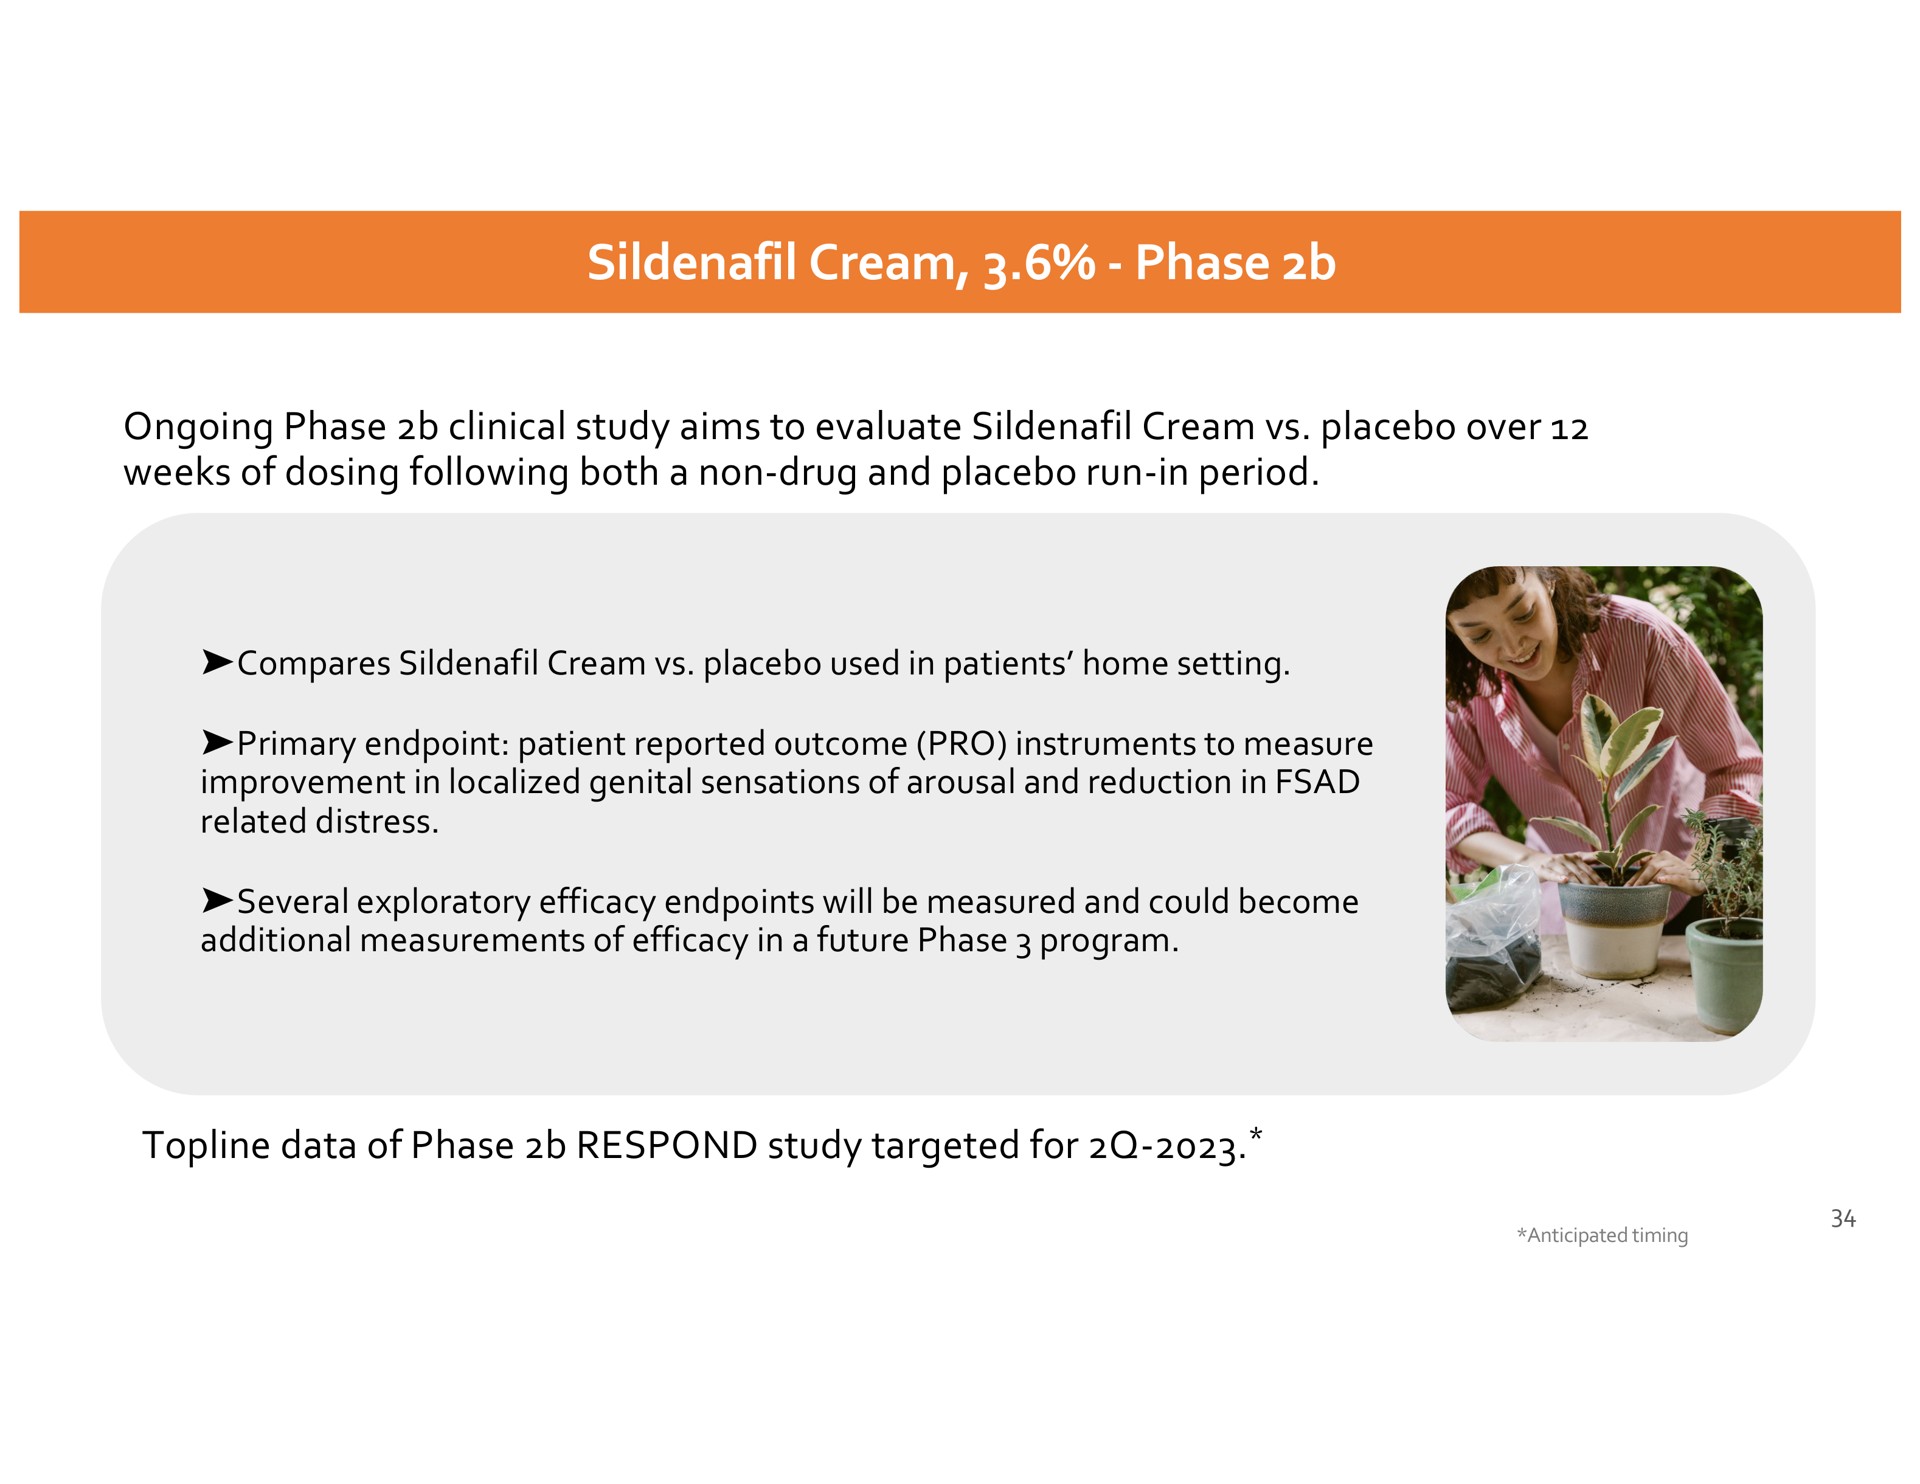 cream phase ongoing phase clinical study aims to evaluate cream placebo over weeks of dosing following both a non drug and placebo run in period compares cream placebo used in patients home setting primary patient reported outcome pro instruments to measure improvement in localized genital sensations of arousal and reduction in related distress several exploratory efficacy will be measured and could become additional measurements of efficacy in a future phase program topline data of phase respond study targeted for | Dare Bioscience